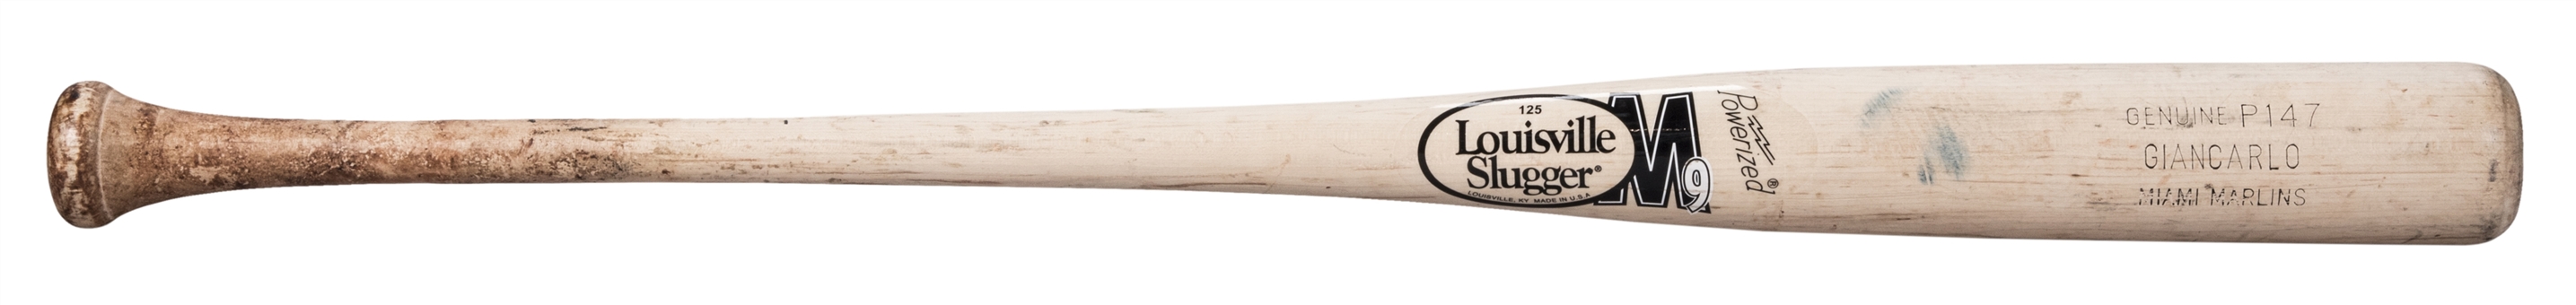 2012 Giancarlo "Mike" Stanton Game Used and Photo Matched Louisville Slugger M9 P147 Model Bat Used on 06/22/13 (PSA/DNA GU10)  